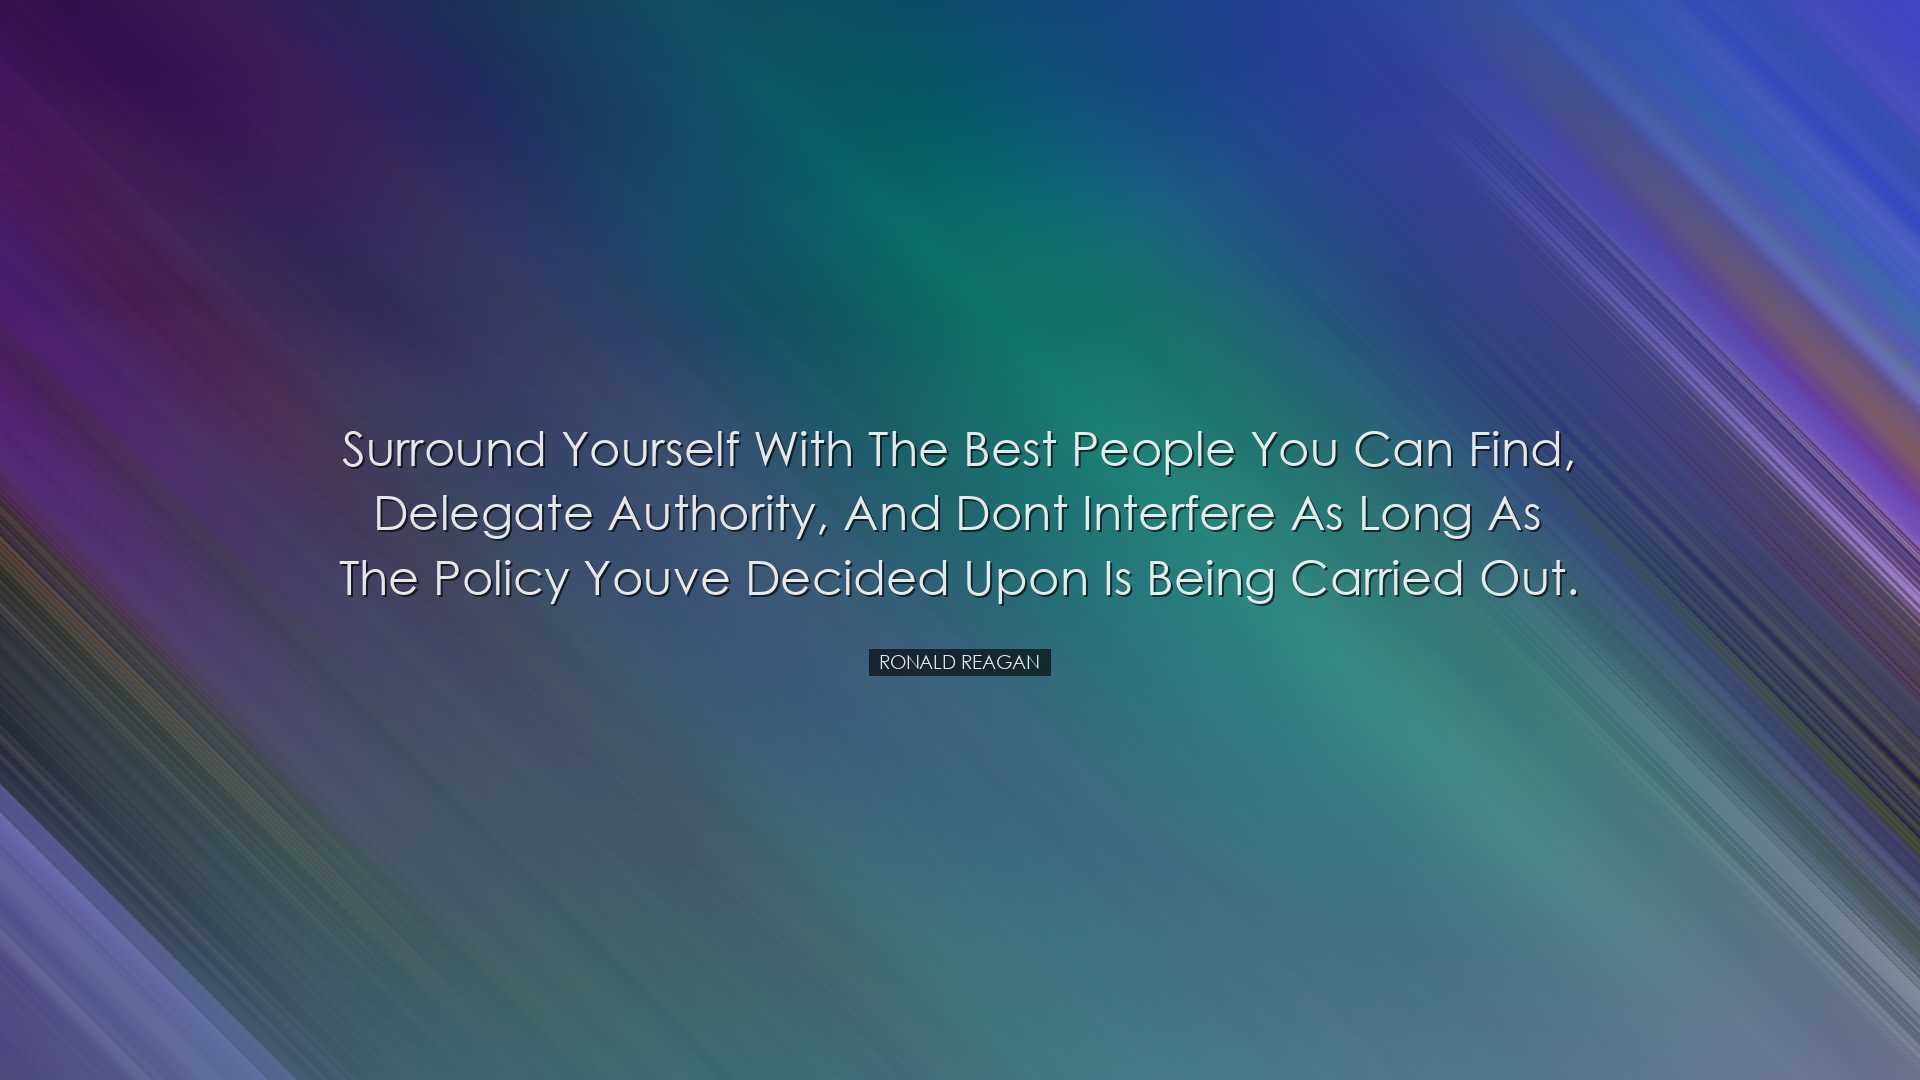 Surround yourself with the best people you can find, delegate auth